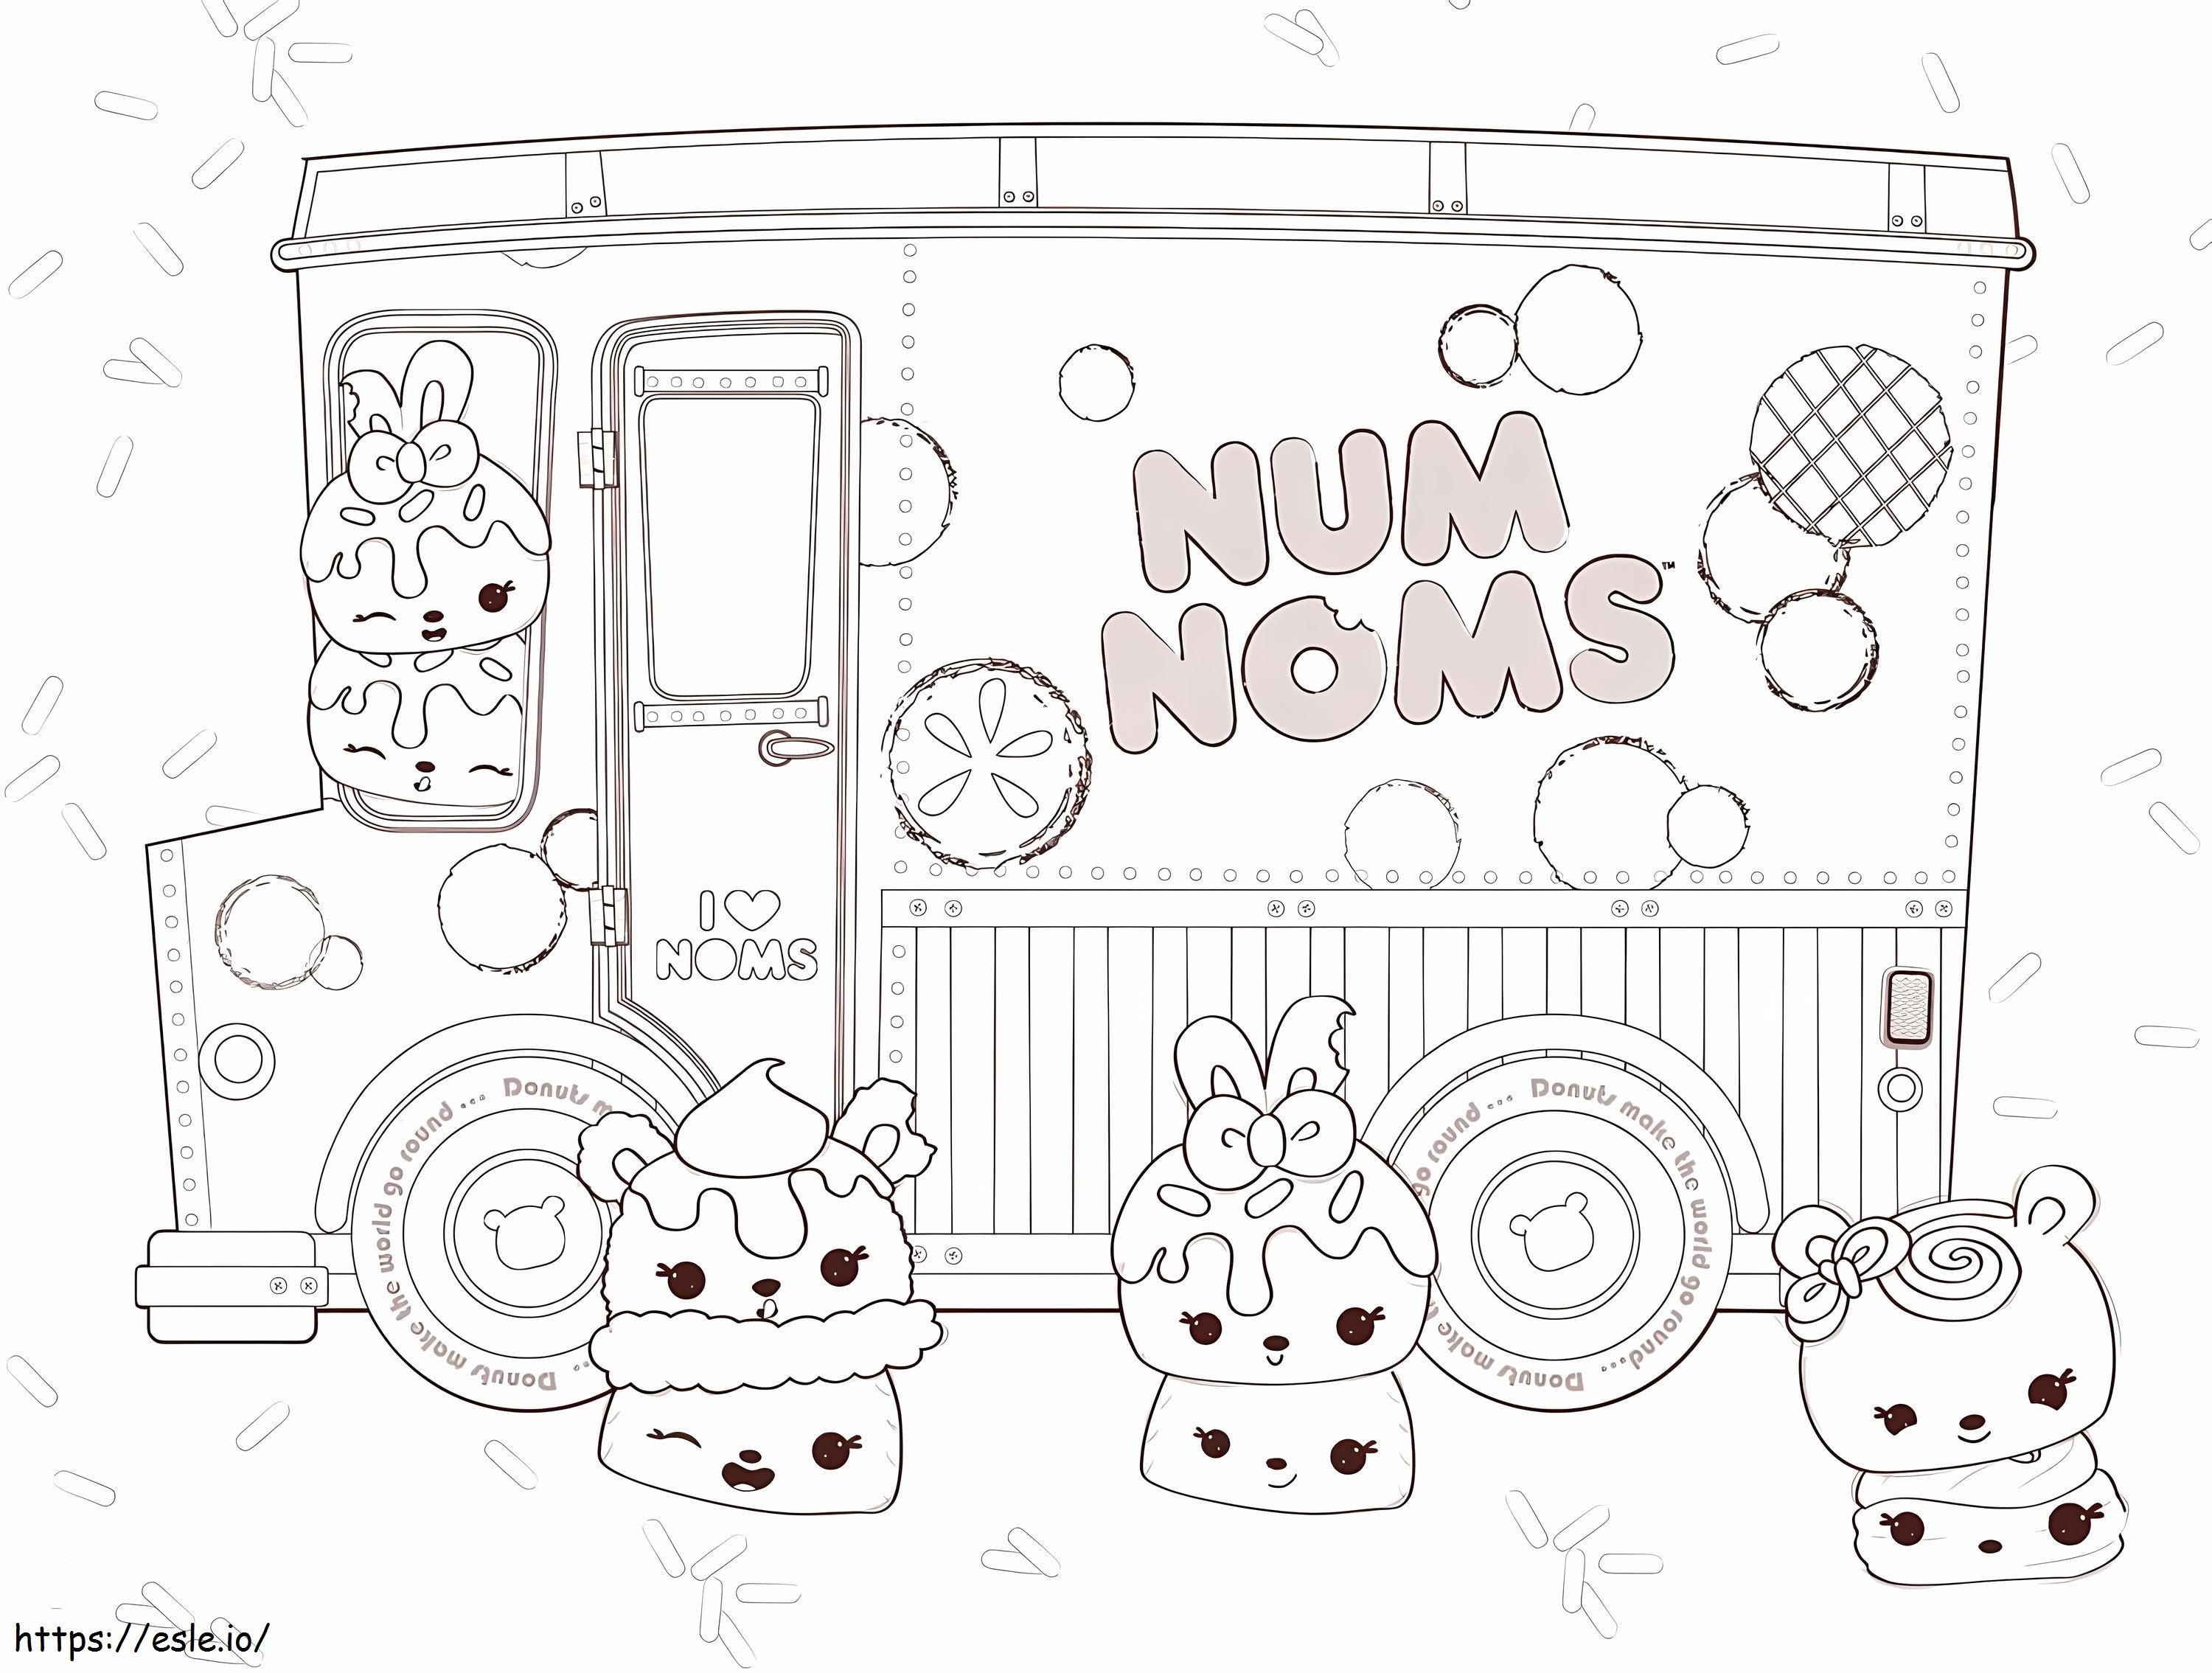 All The Characters In Num Noms With Bus coloring page